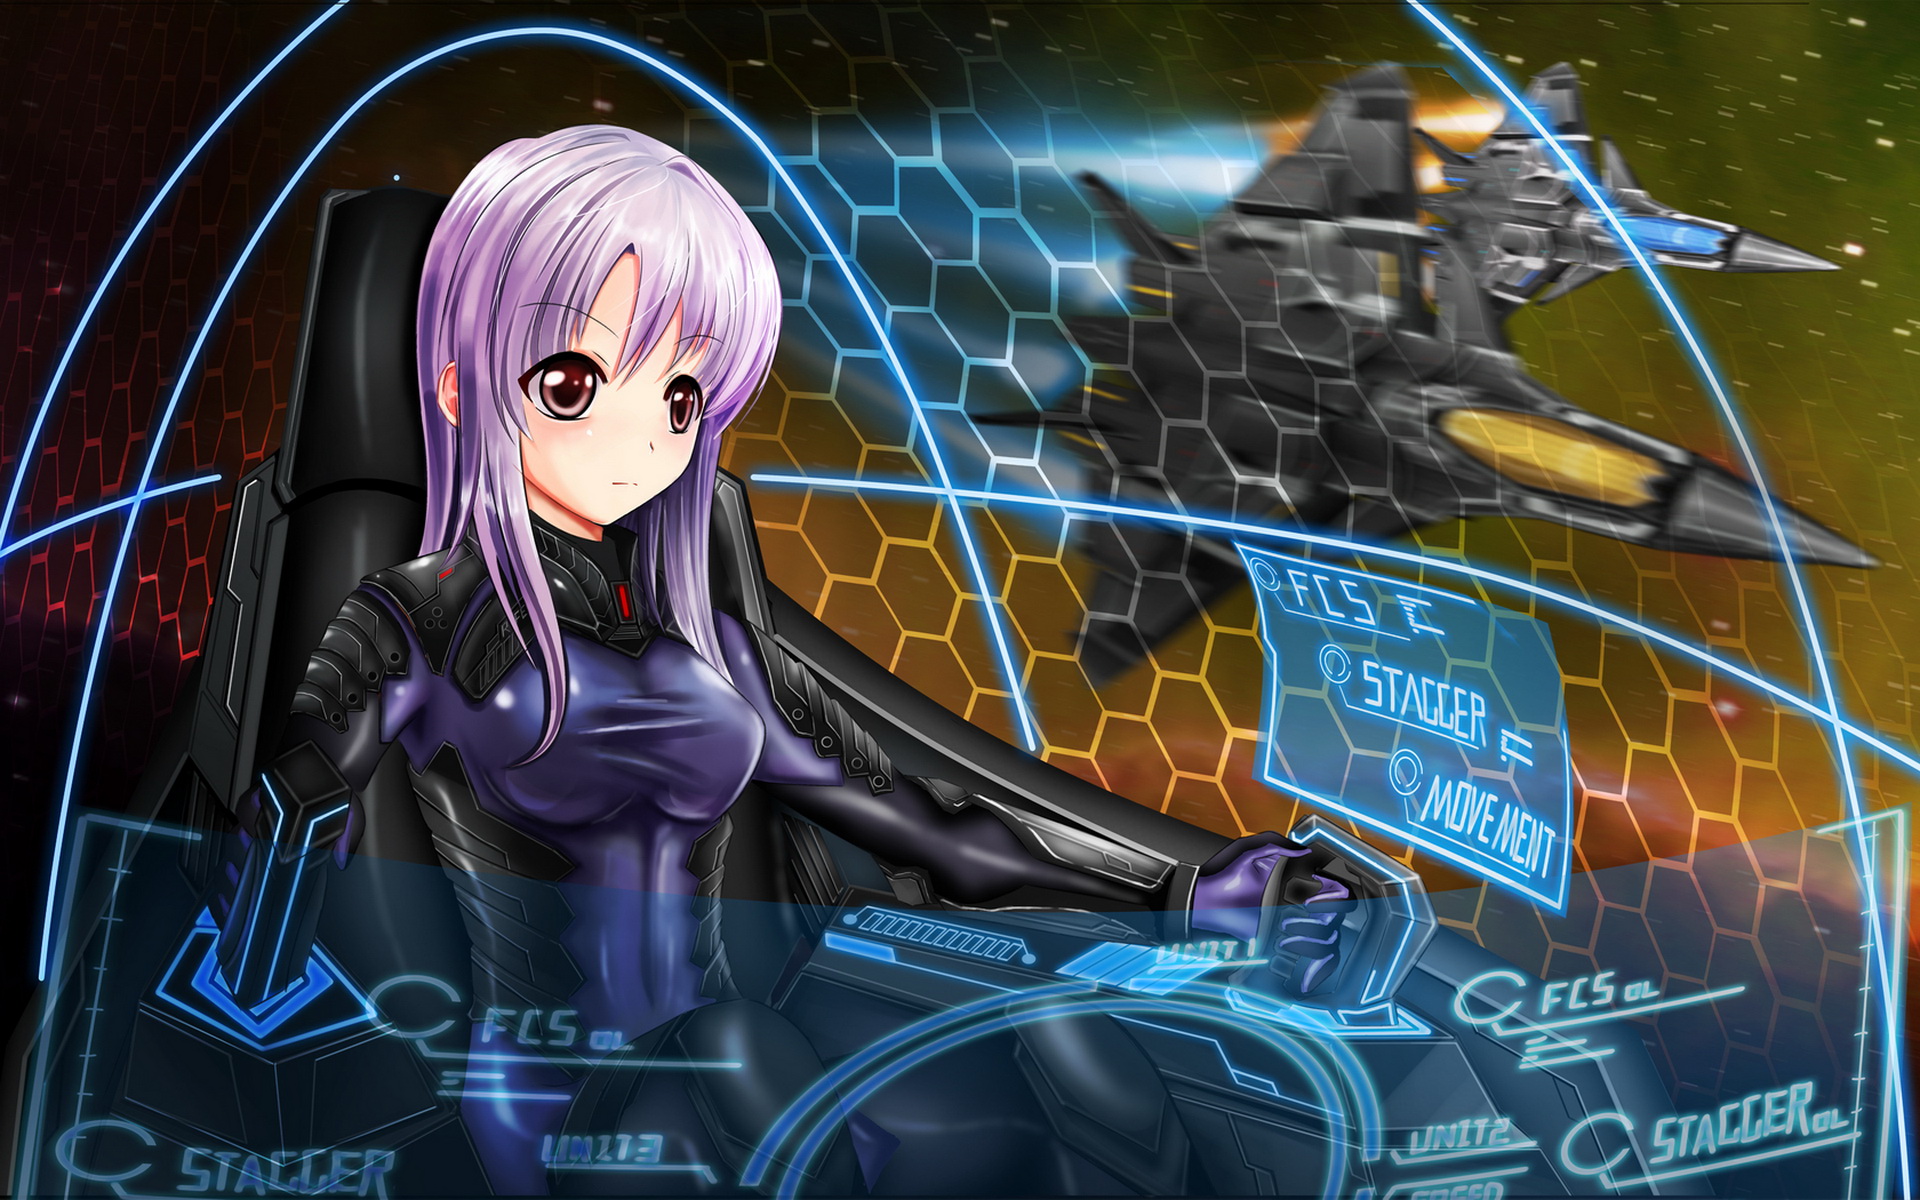 Space Fighter Anime Girl Wallpapers